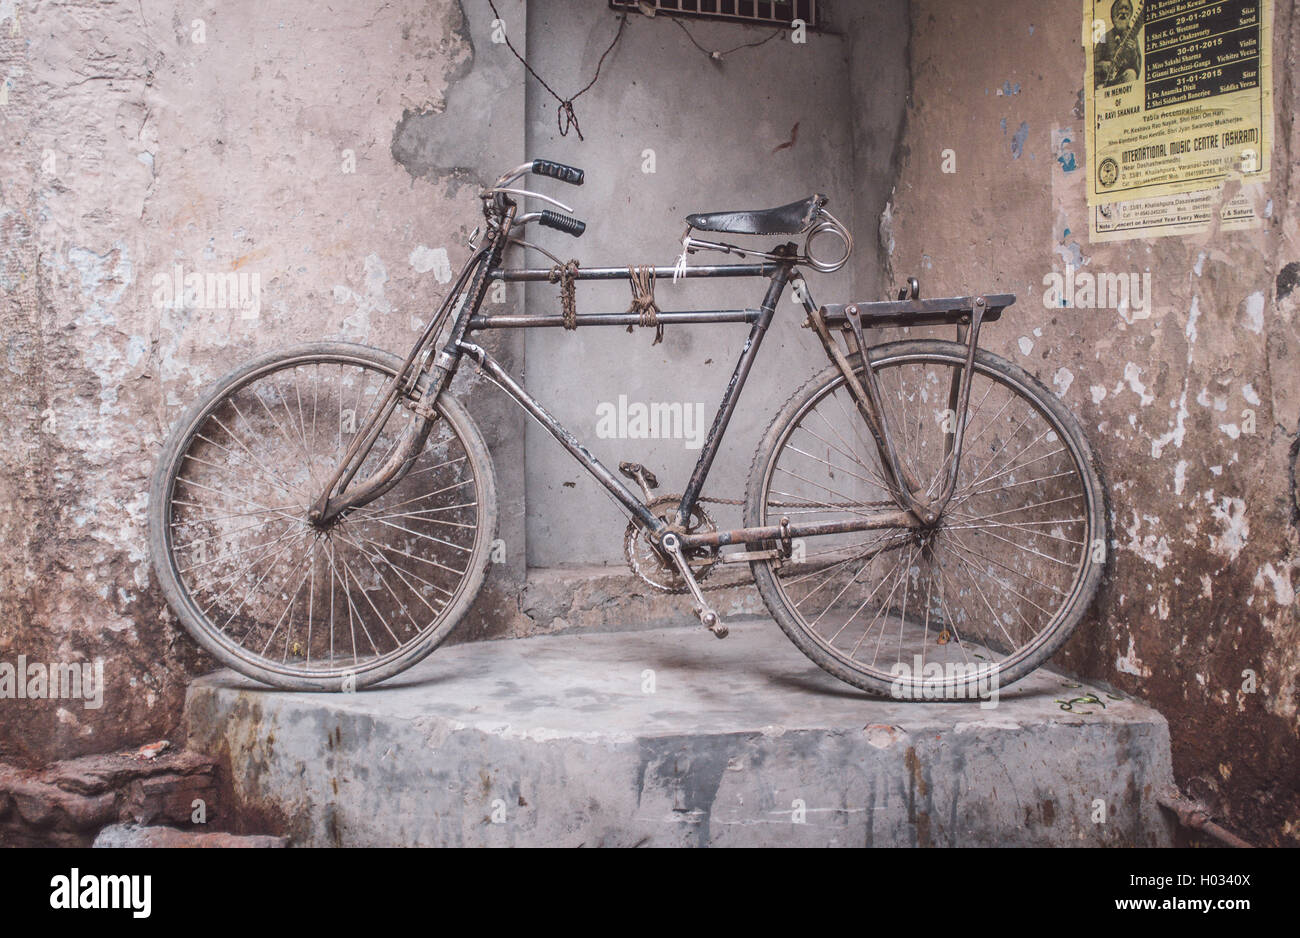 VARANASI, INDIA - 25 FEBRUARY 2015: Traditional Indian bicycle parked in corner of street. Post-processed with grain, texture an Stock Photo